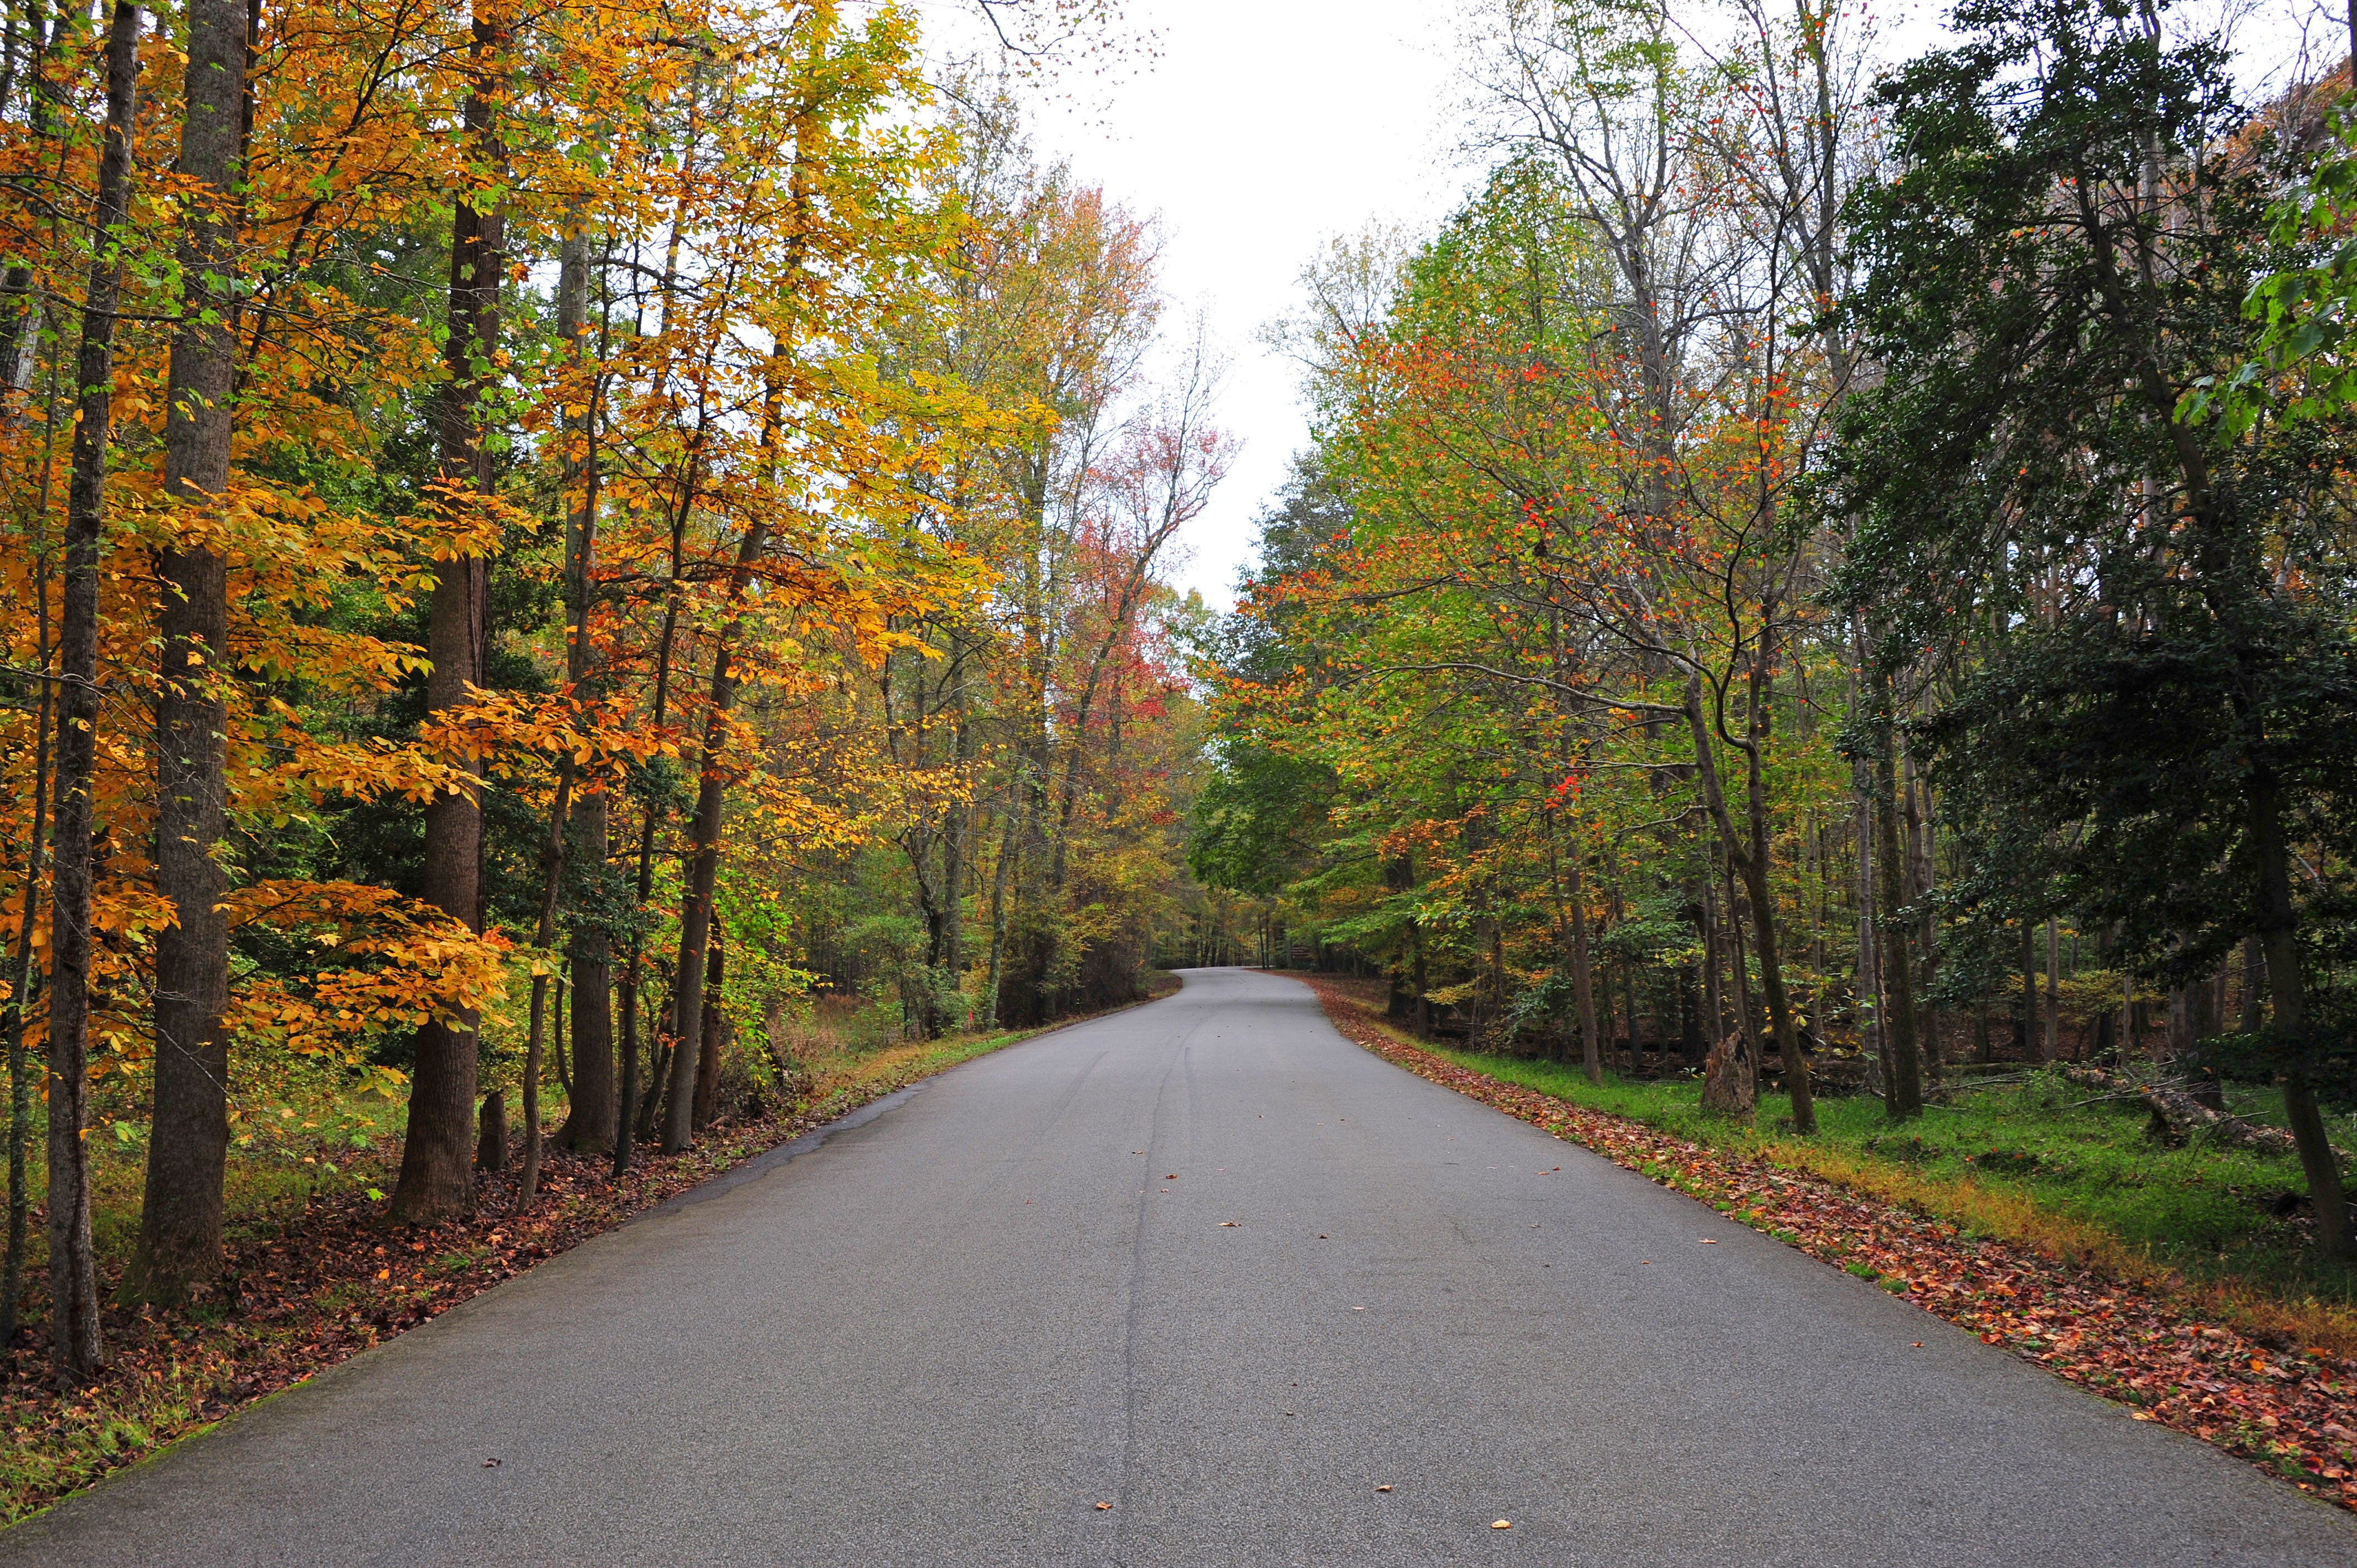 A view down a paved road, flanked by trees with yellow, green and red foliage.